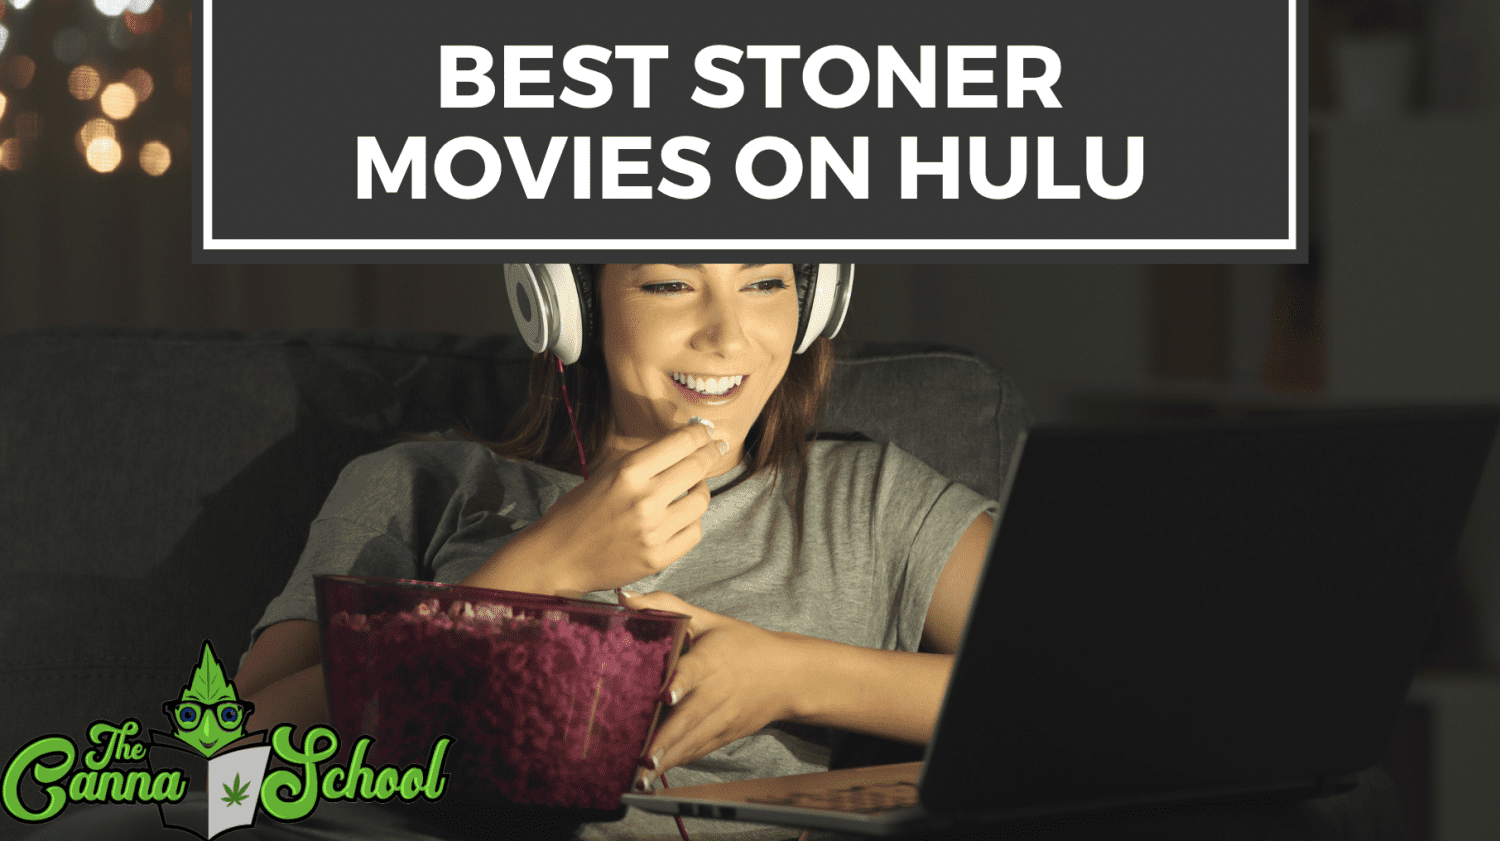 27 of The Best Stoner Movies on Hulu – The Cannabis School